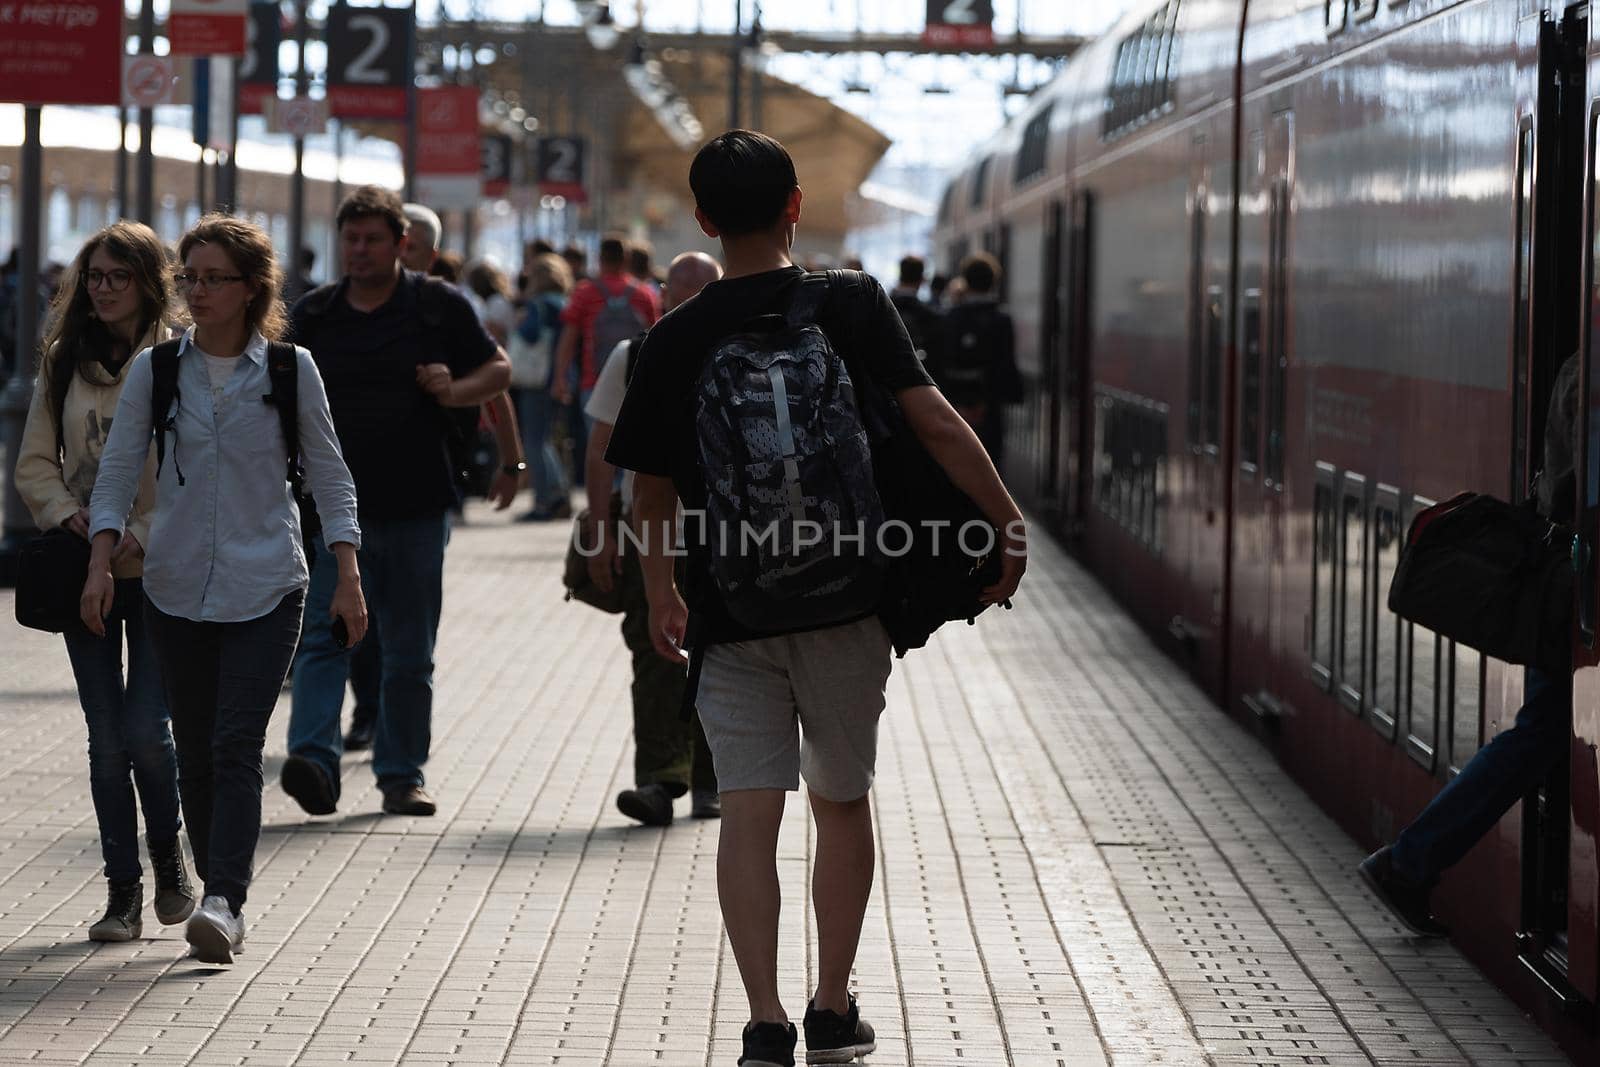 July 2, 2019 Moscow, Russia. Passengers on the platform of the Kiev railway station in Moscow before the departure of the train.